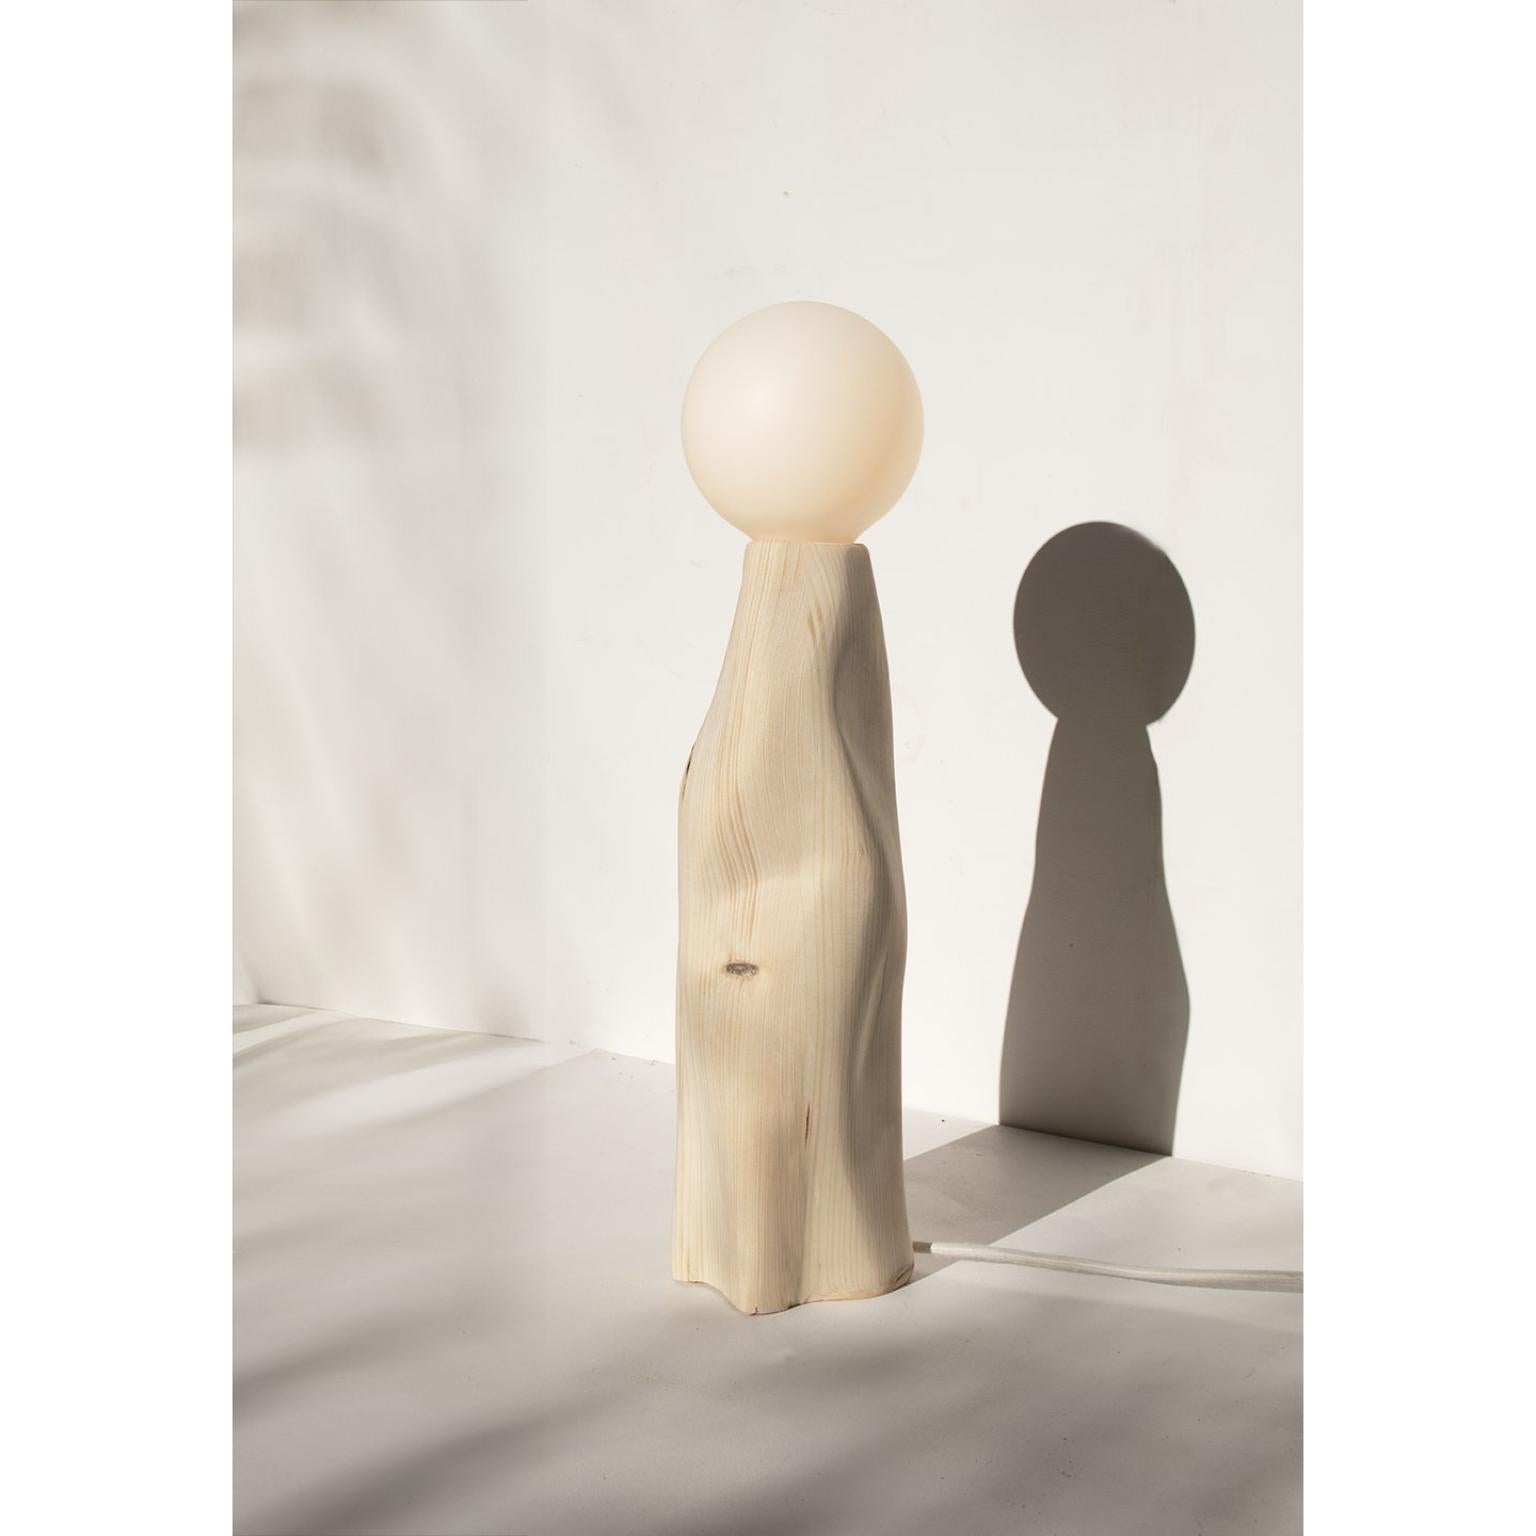 Cleo Lamp by Alice Lahana Studio
Dimensions: W 12 x D 12 x H 52 cm
Materials: Stoneware.

Led Bulb G125 7W 2700K E27 (included)

Alice Lahana is a french designer based in Paris. While studying at Ensba, she moved to Sao Paulo, Brazil and learned